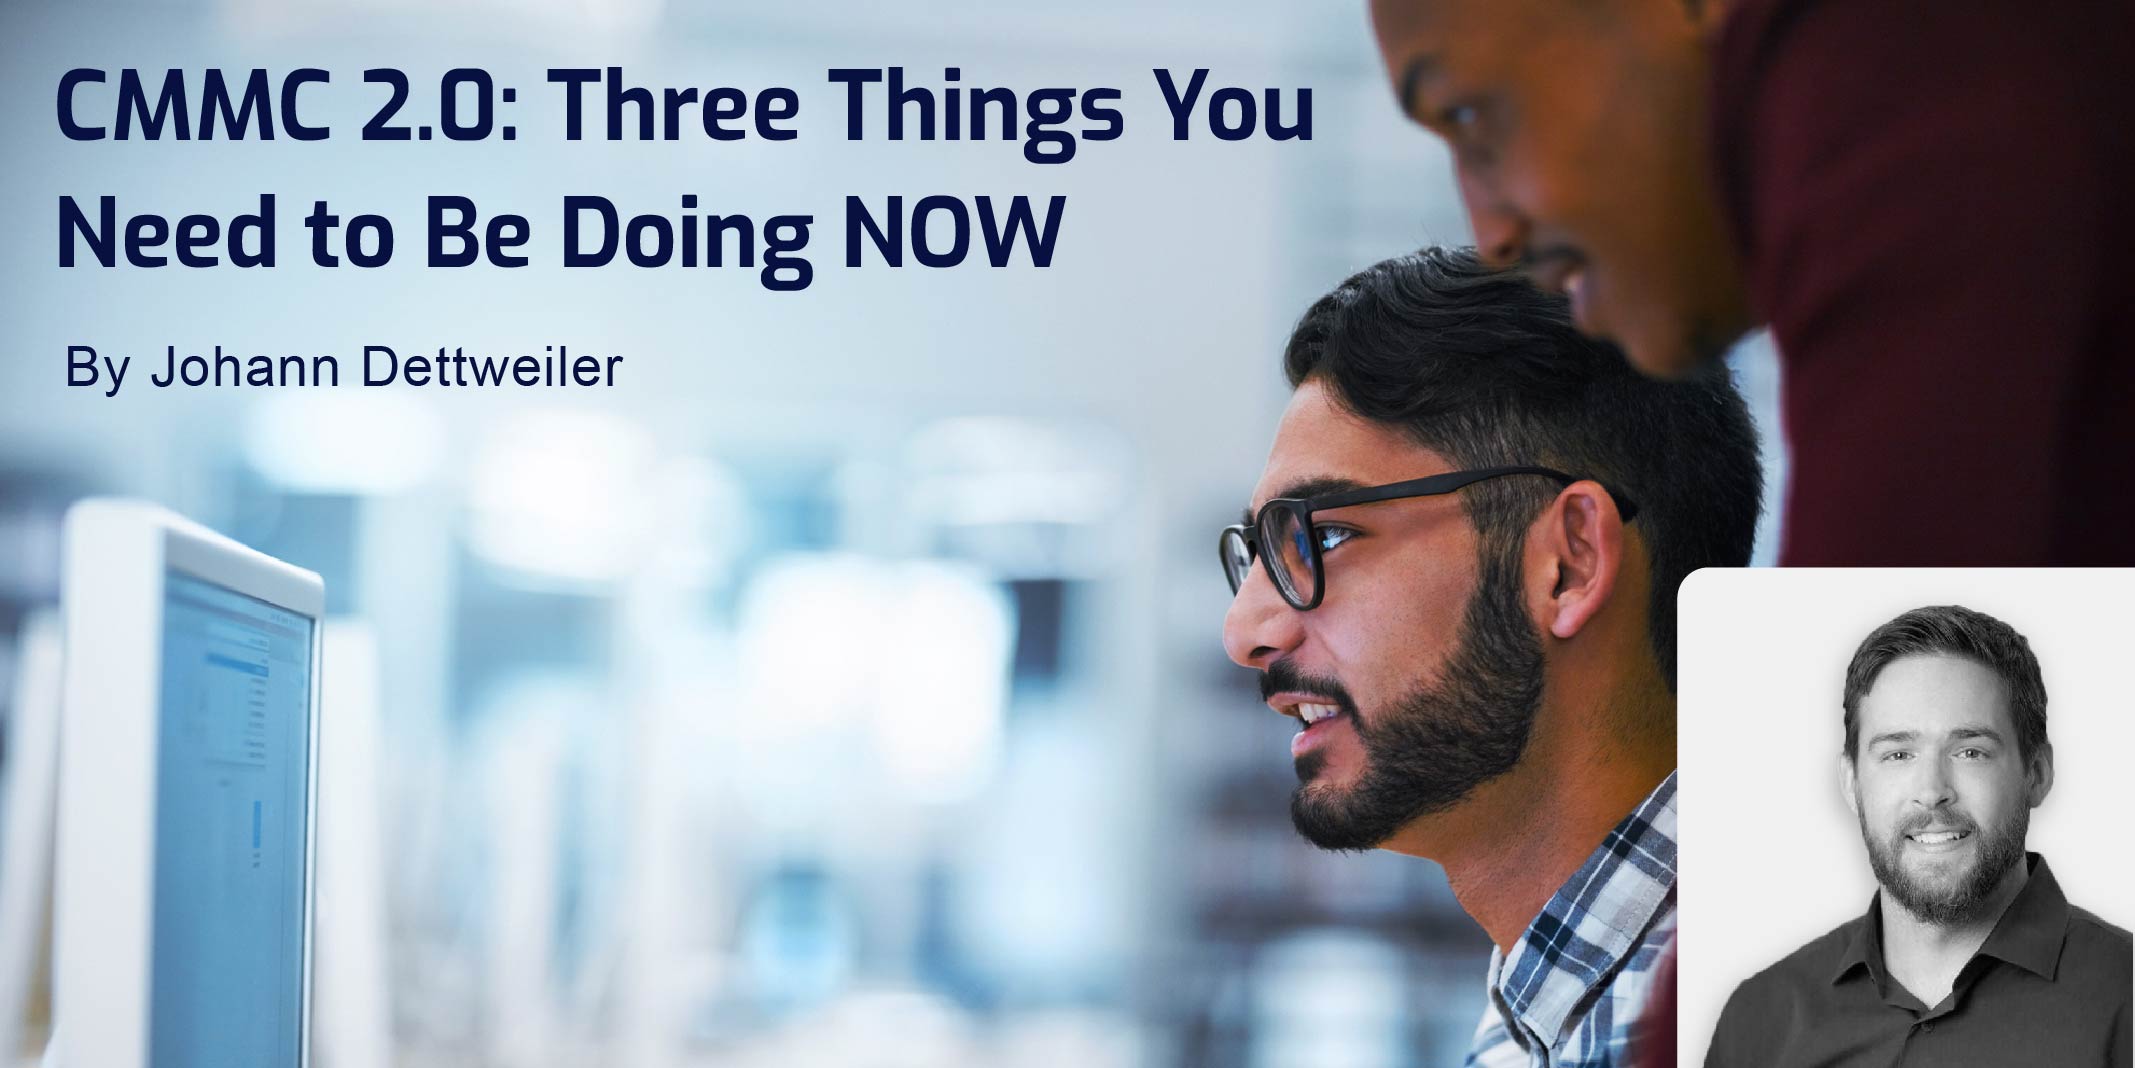 CMMC 2.0: Three Things You Need to Be Doing NOW